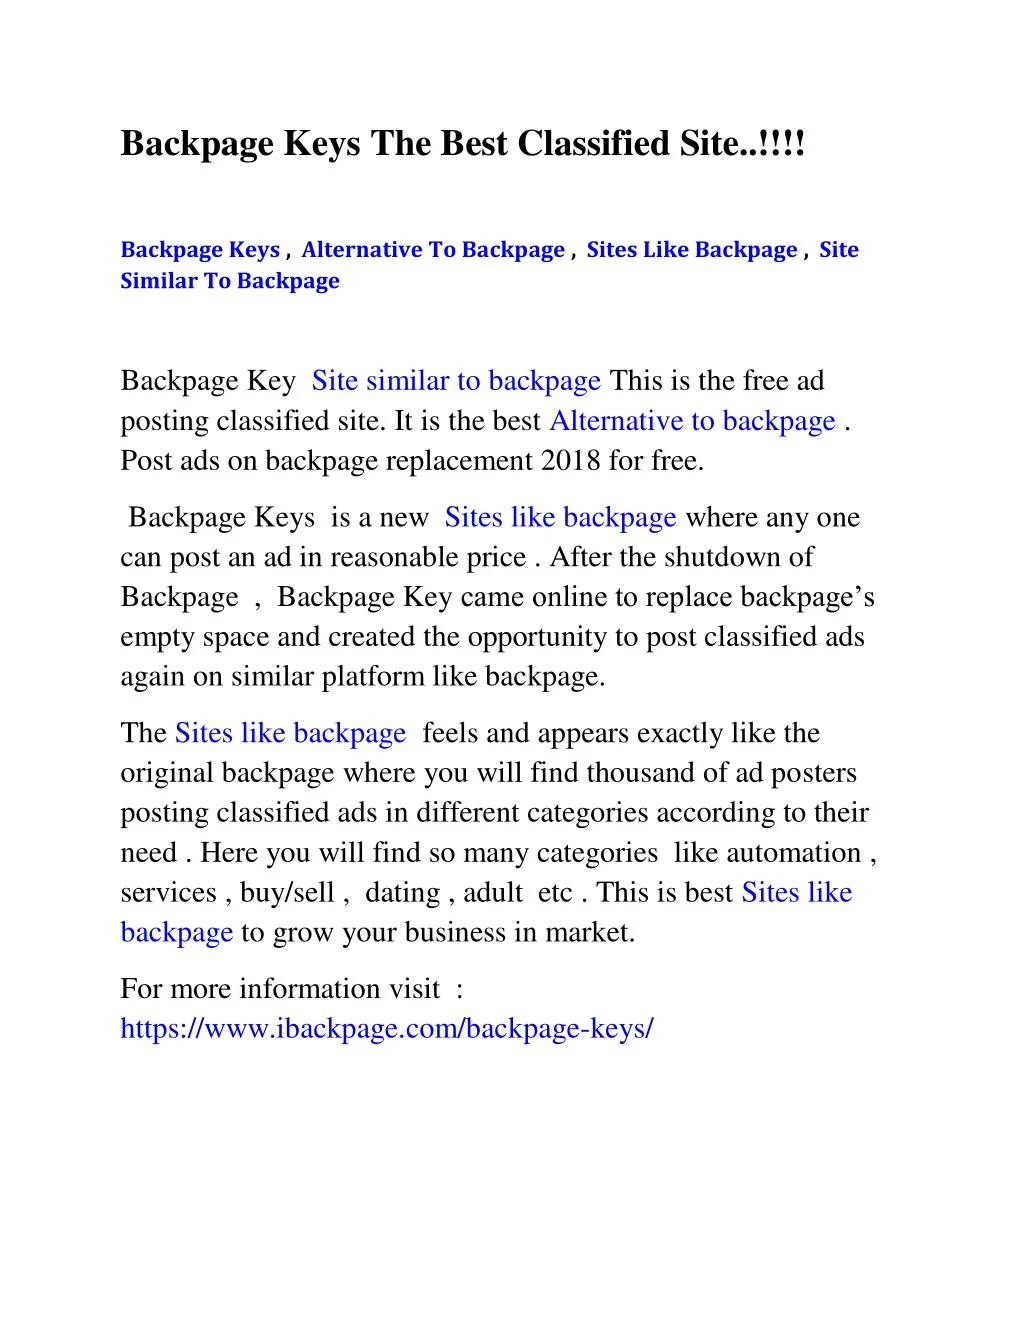 backpage keys the best classified site